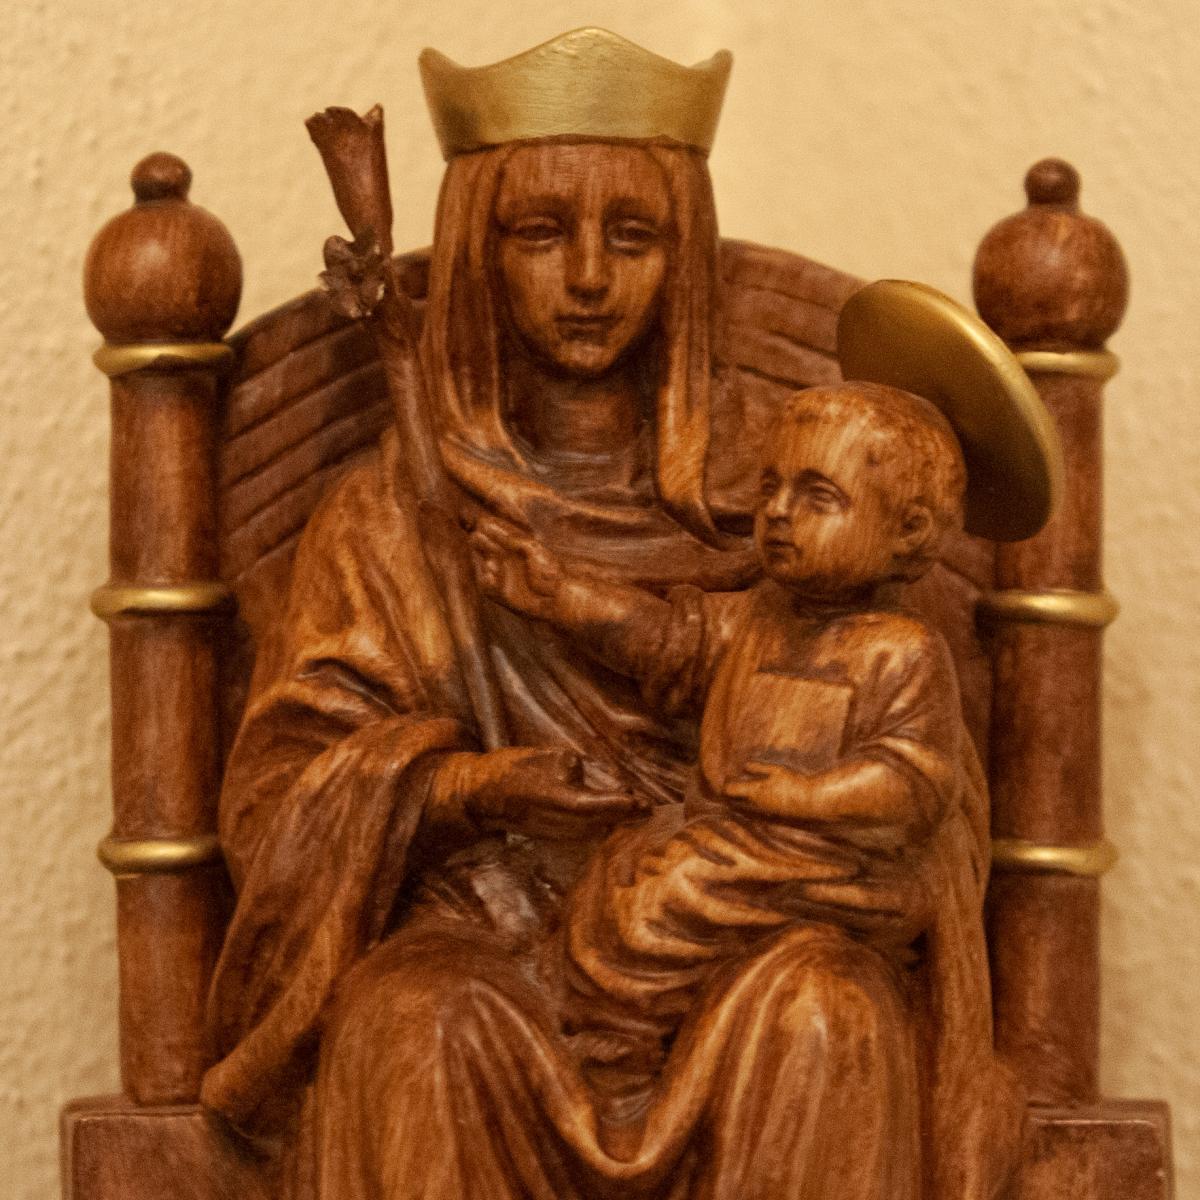 A statue of Our Lady of Walsingham in the Baptistry